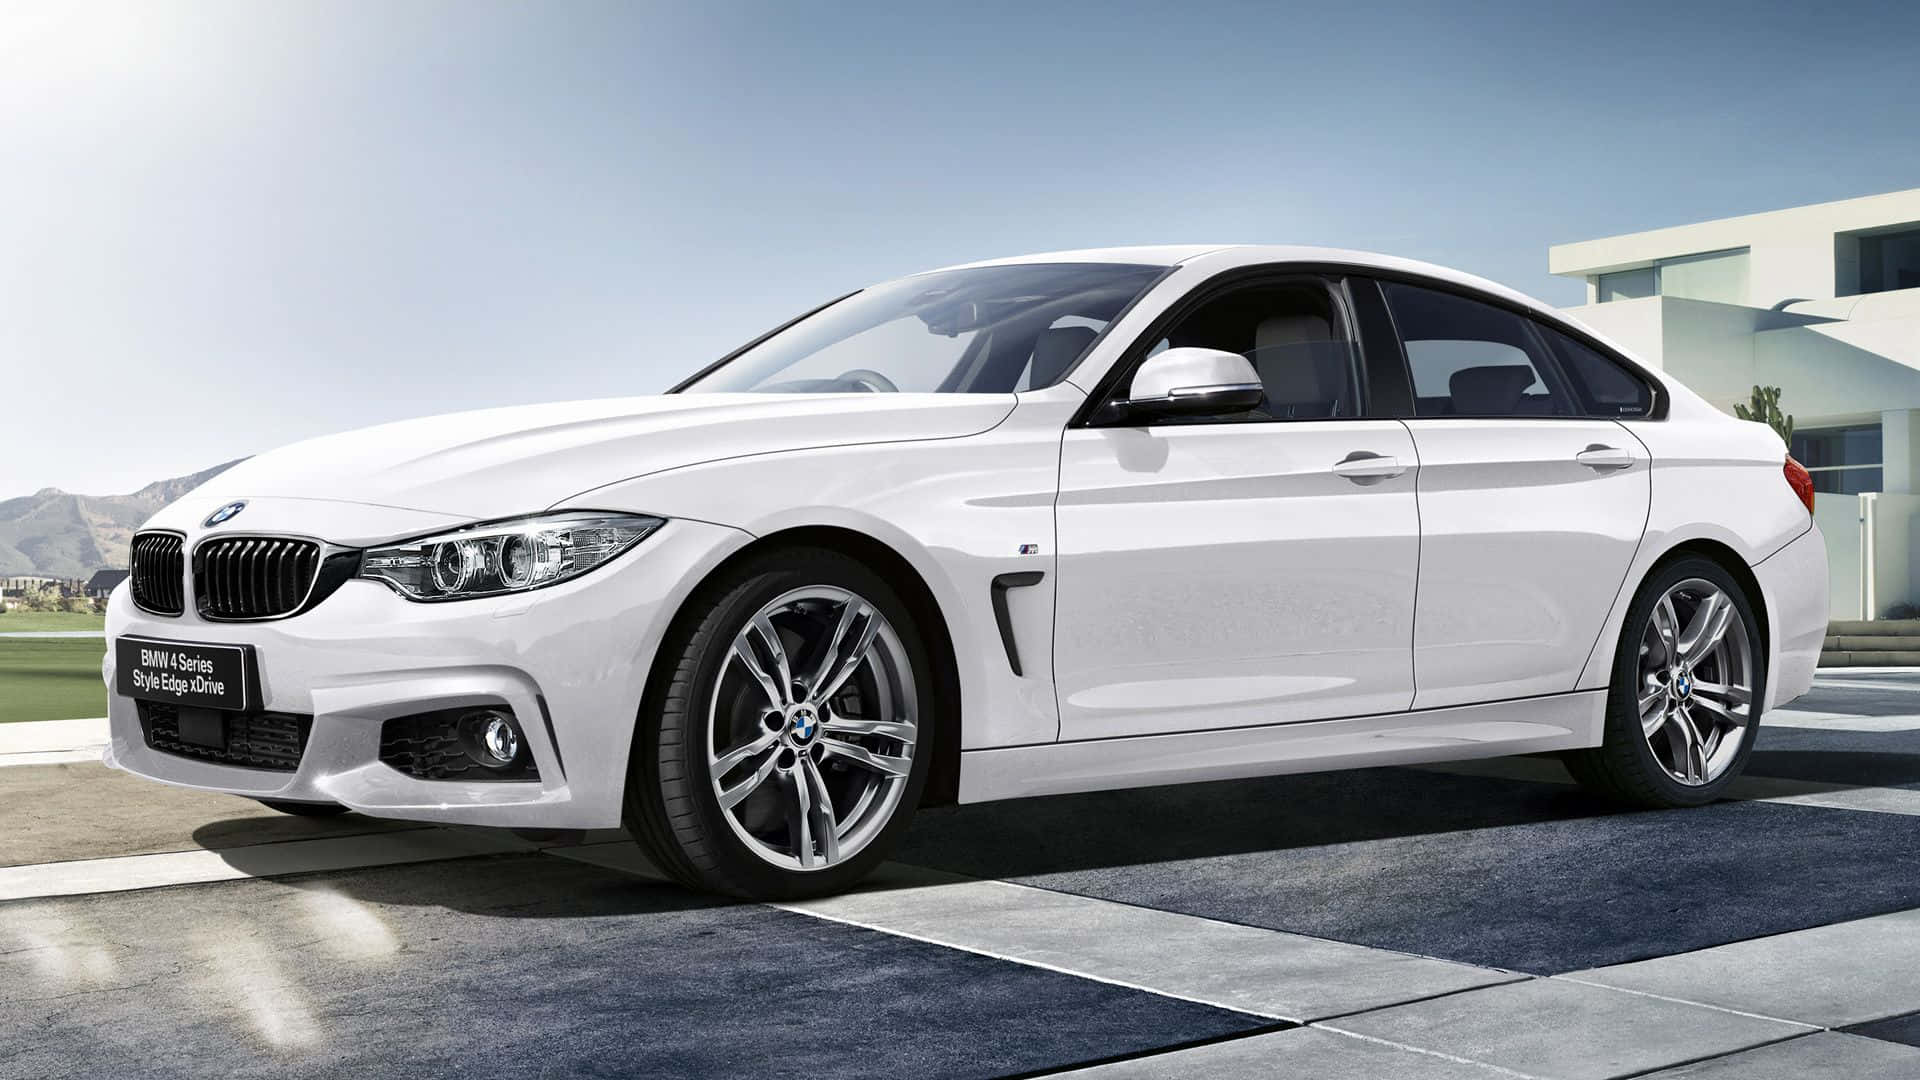 Sleek BMW 4 Series Sports Coupe in Action Wallpaper